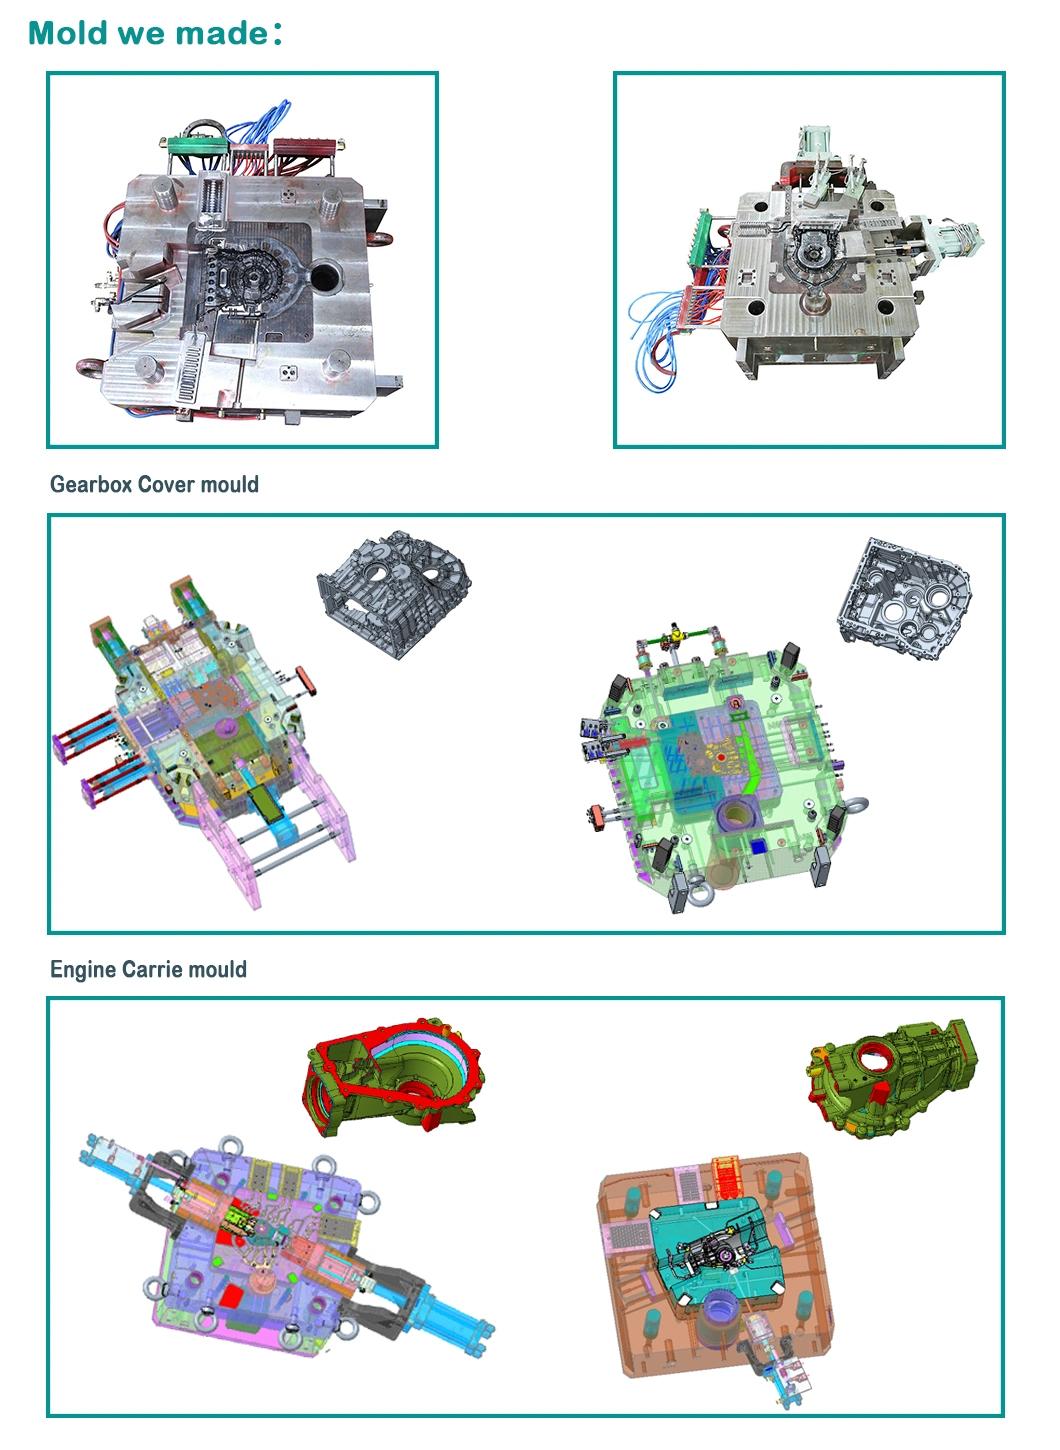 Free Sample Aluminium/Zinc/Zamak/Magnesium Alloy Die Casting Mould From Direct Mold Maker Symbos for Auto/Hardware/LED Light/Medical in China